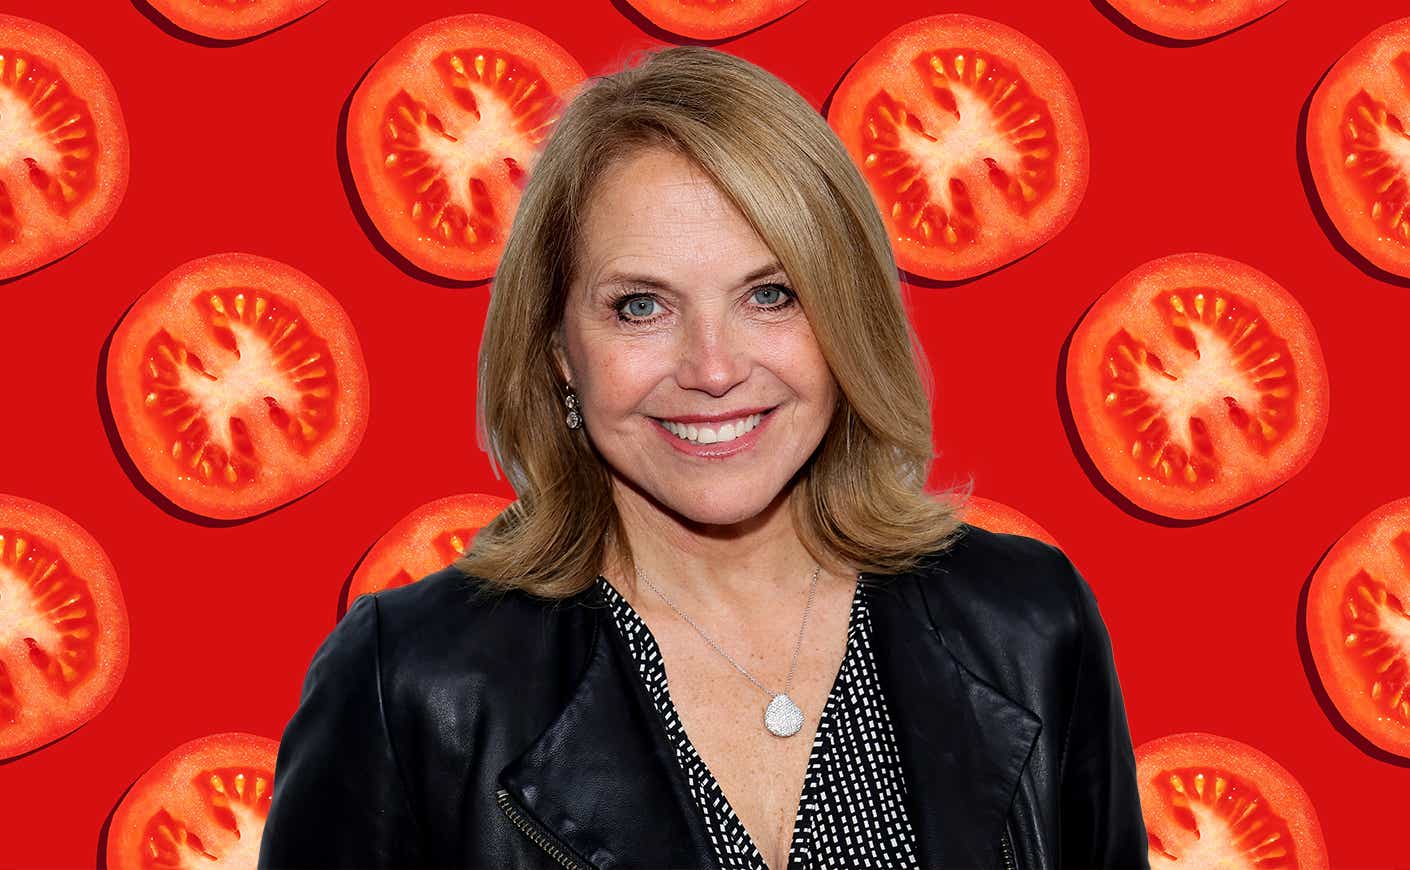 Katie Couric on background of tomatoes